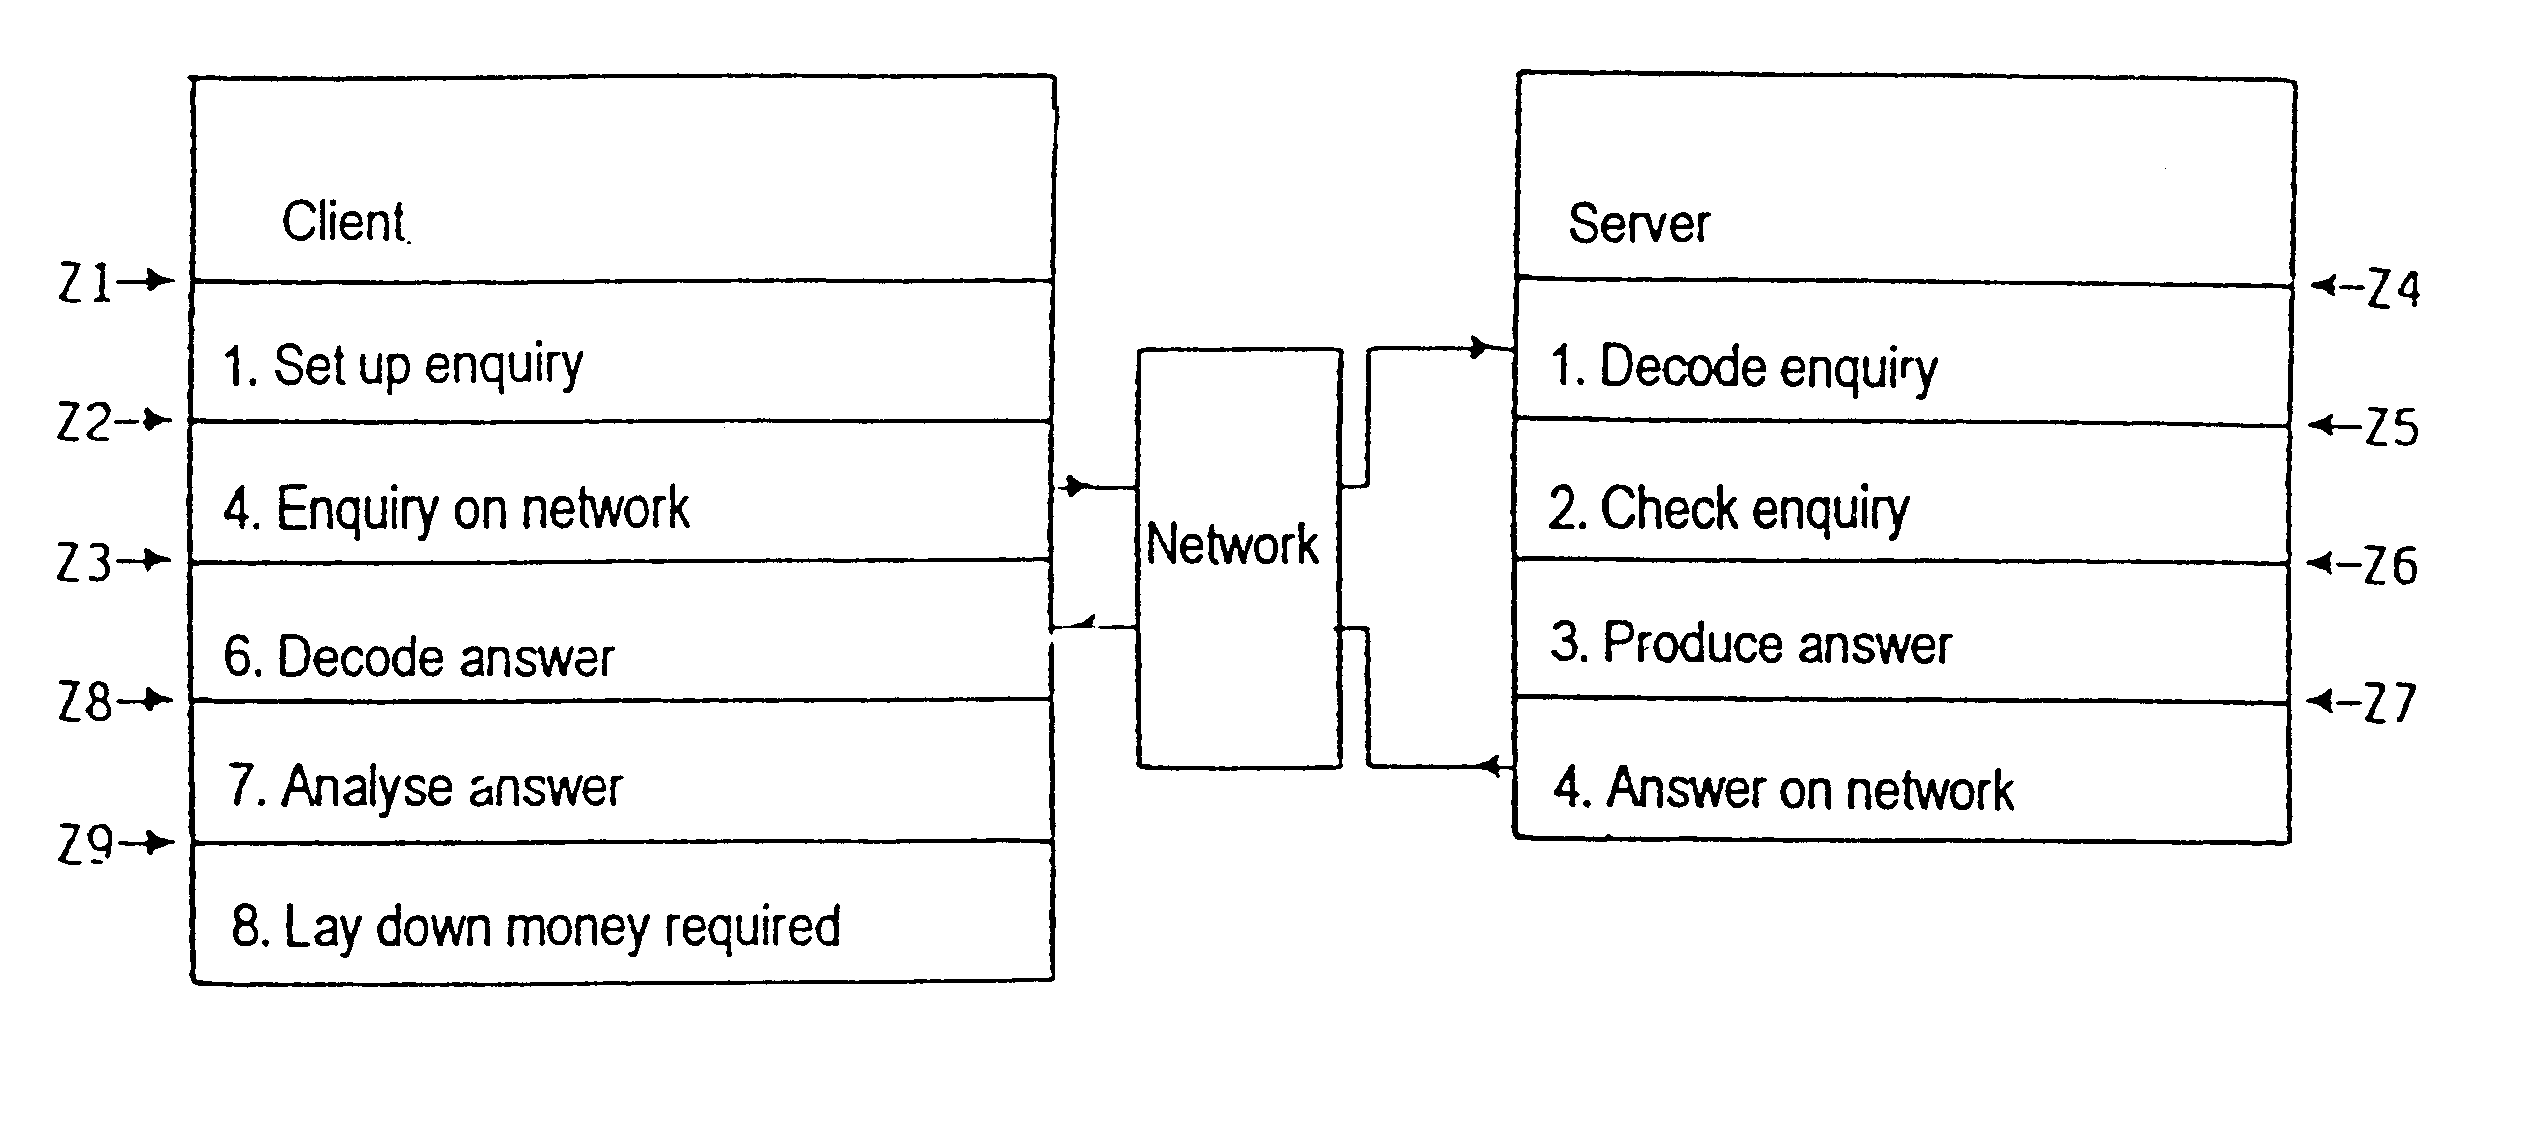 System and procedure for measuring the performance of applications by means of messages